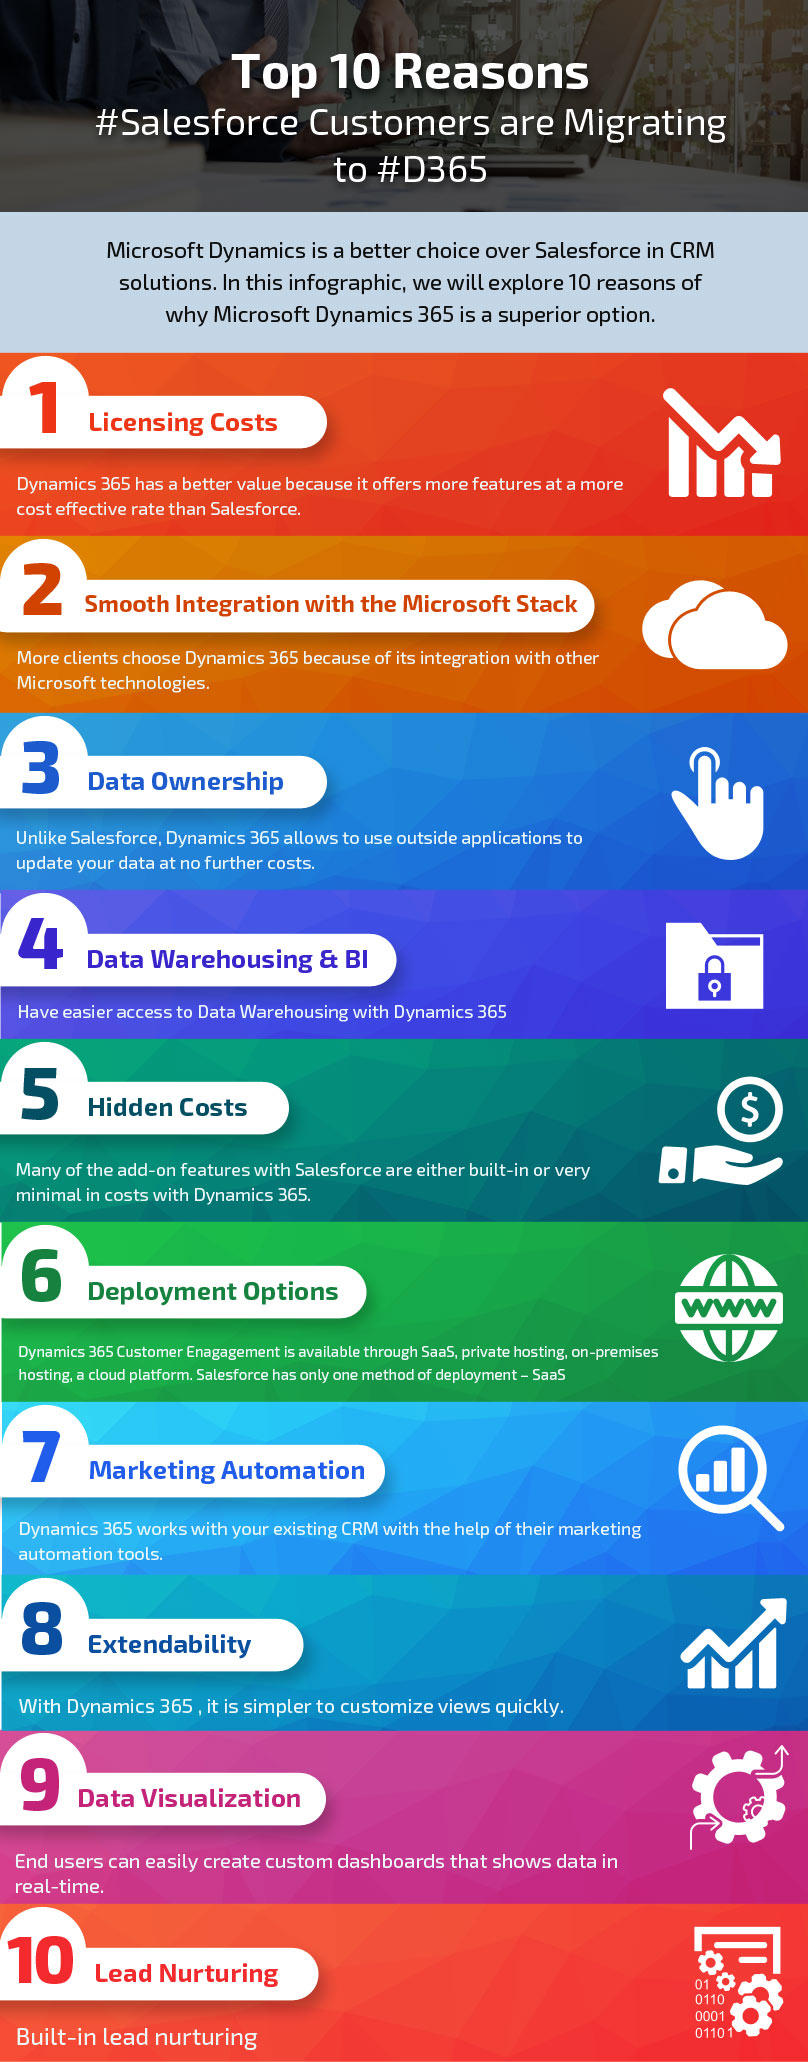 DynamicsSmartz Infographic - Top 10 Reasons to Migrate from Salesforce to Microsoft D365